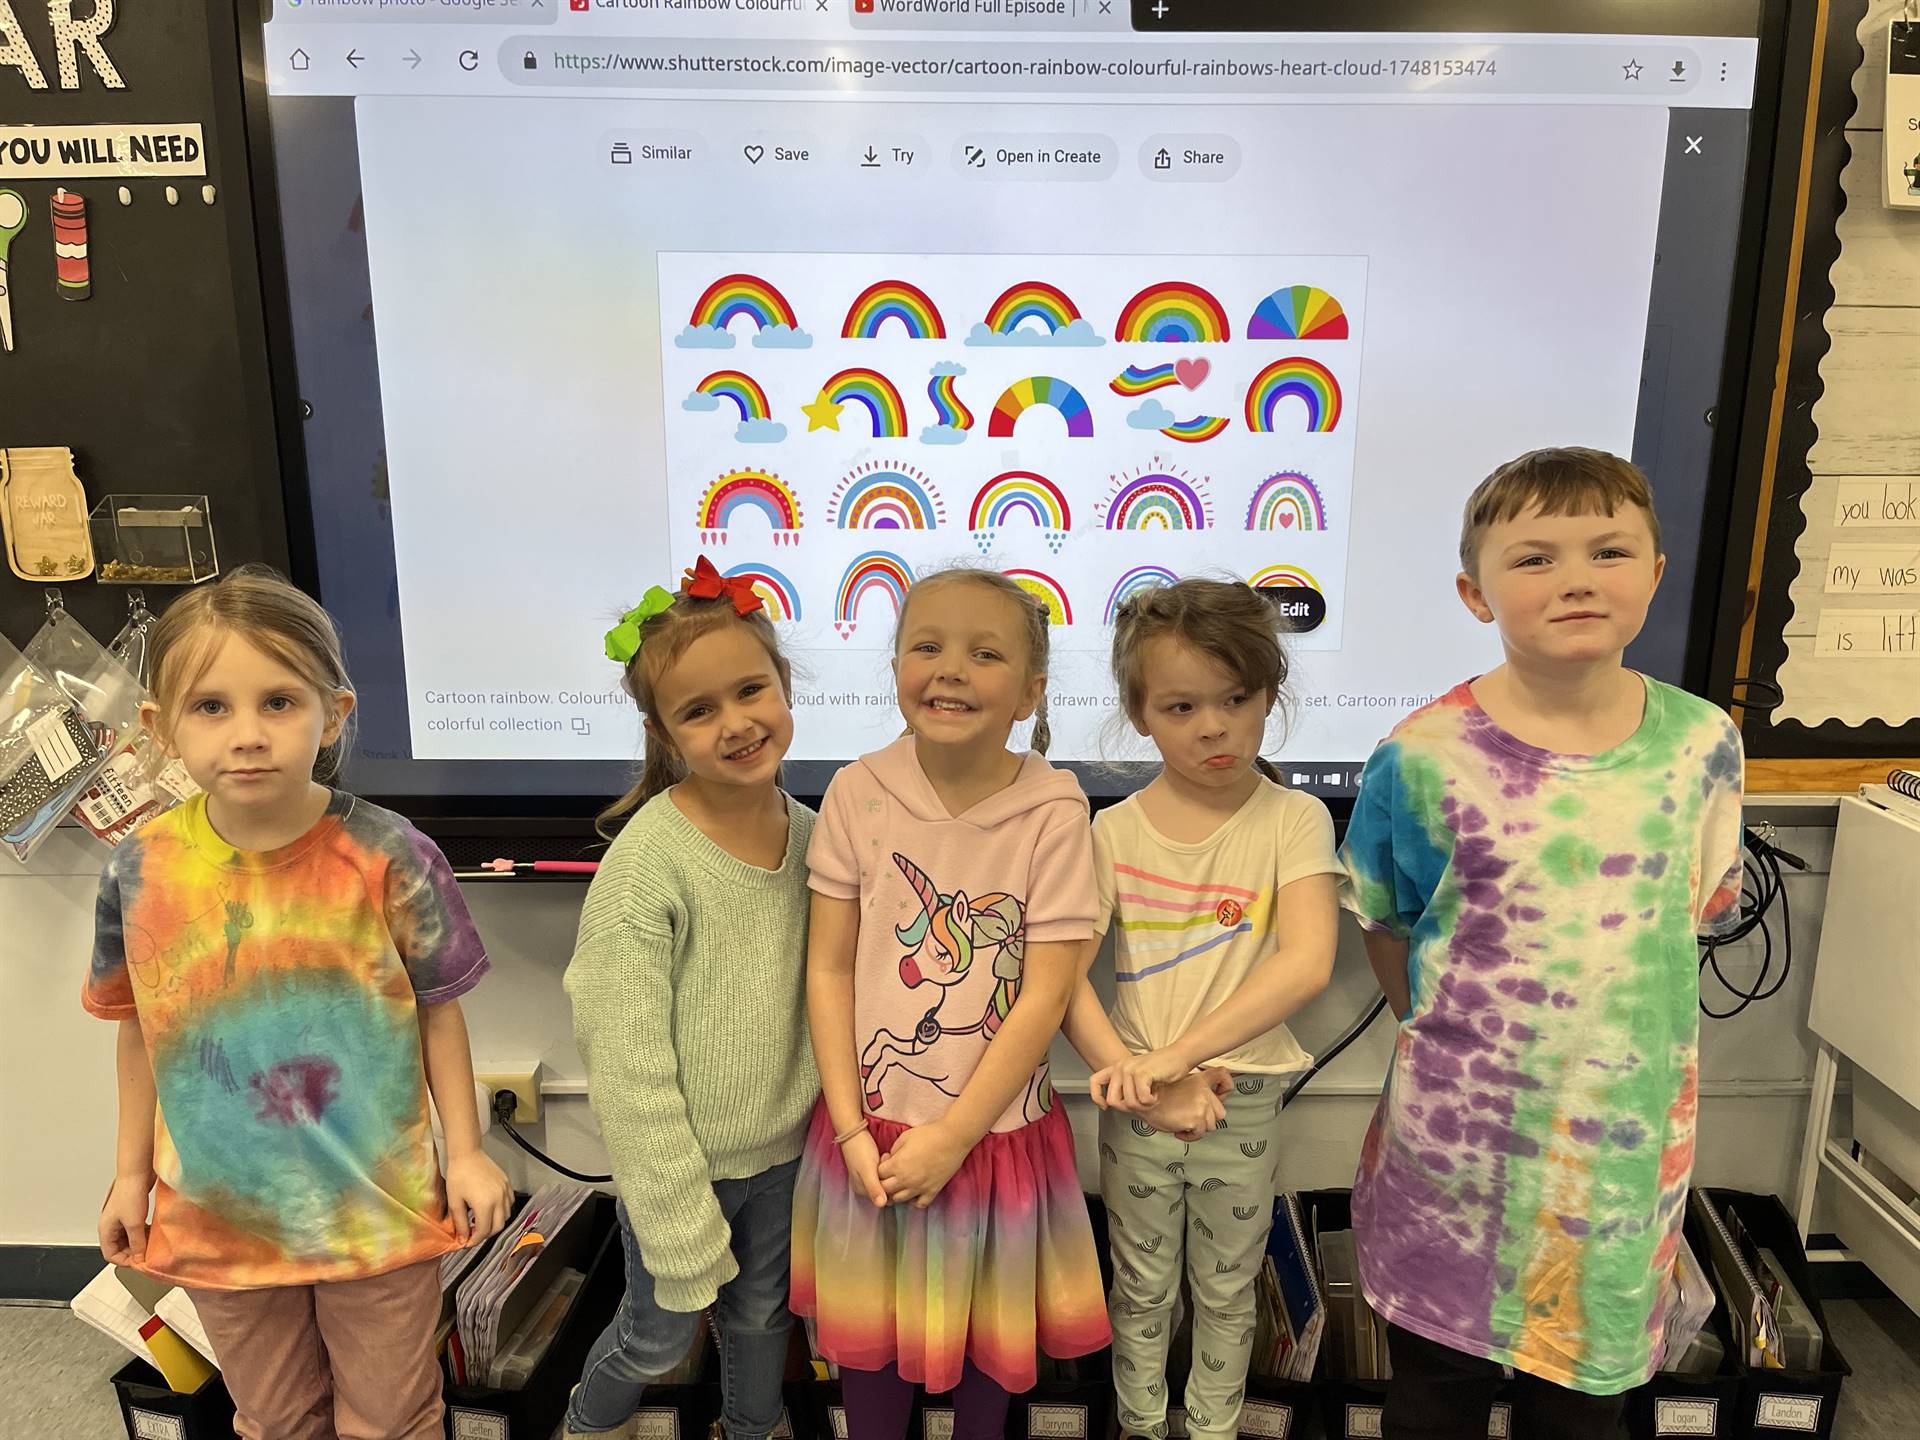 Students dressed up in rainbow colors for spirit week.